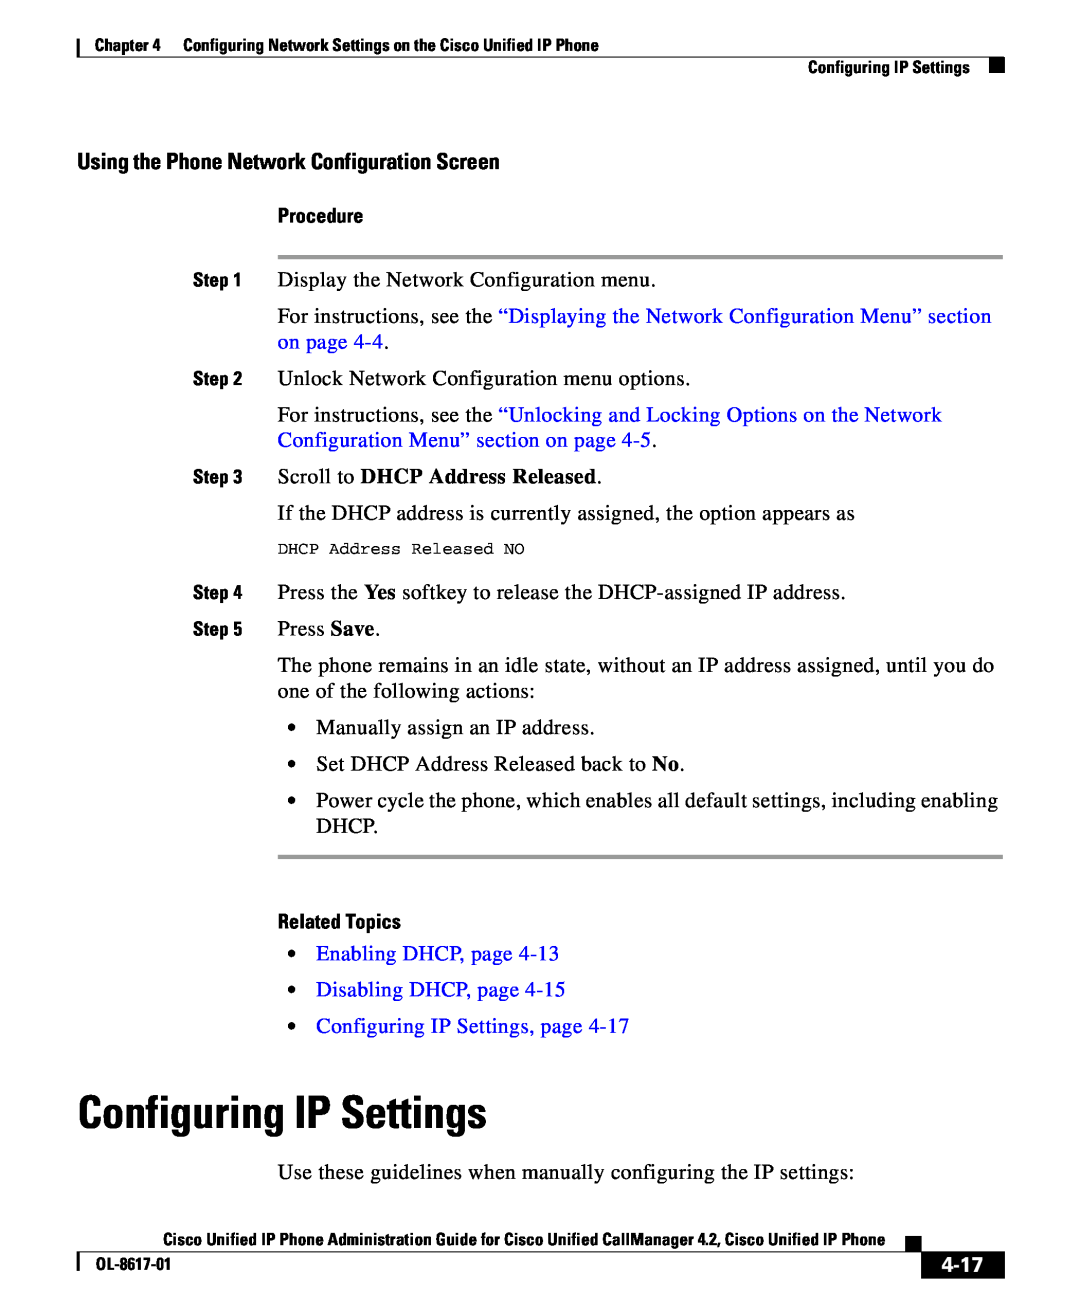 Cisco Systems 4.2 manual Configuring IP Settings, Scroll to DHCP Address Released, 4-17, Procedure, Related Topics 